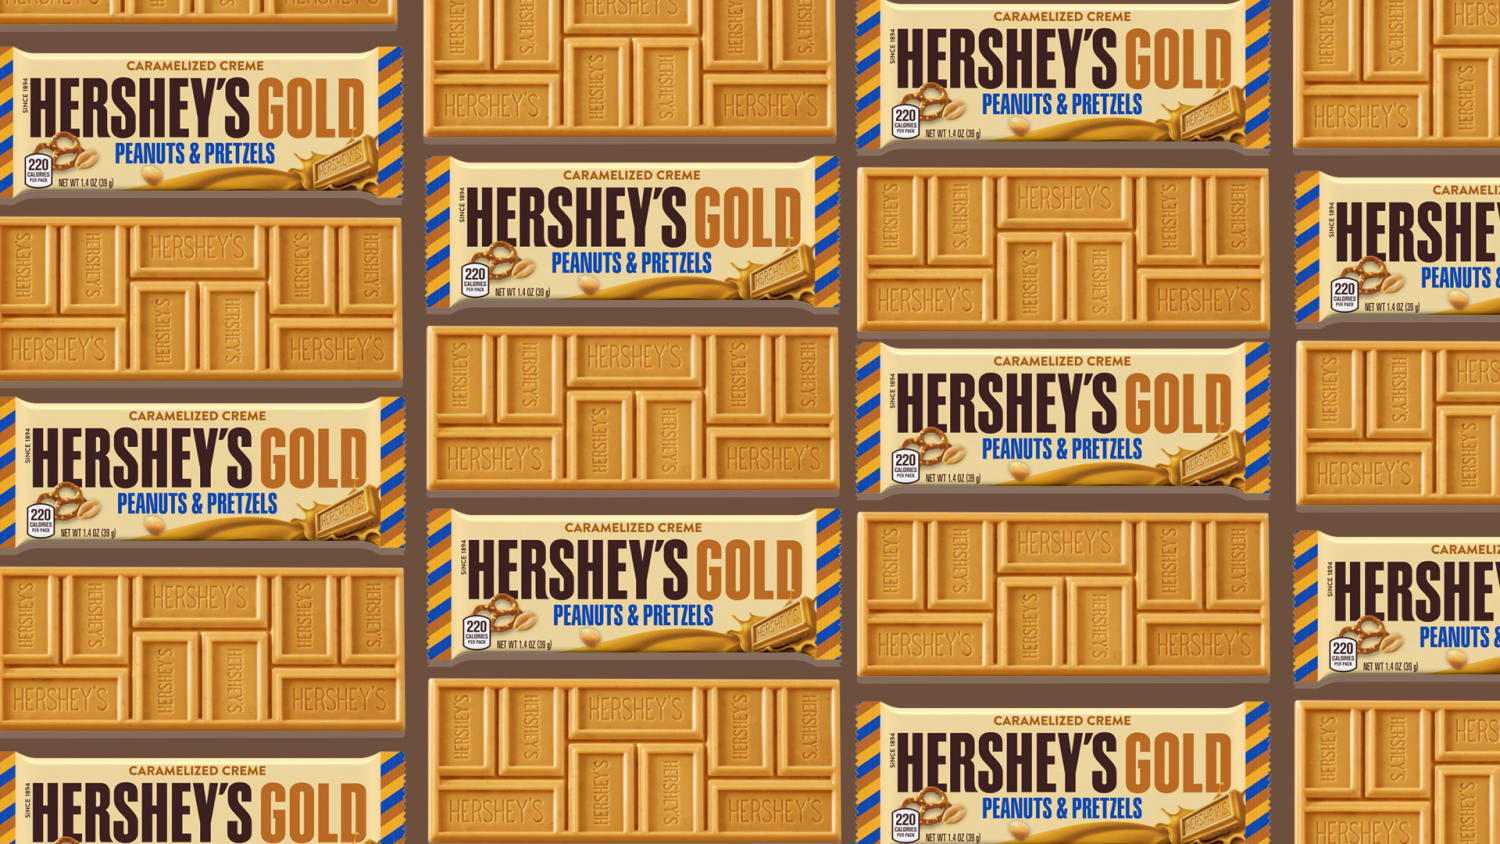 Hershey's Gold Is the Brand's Newest Non-Chocolate Chocolate Bar